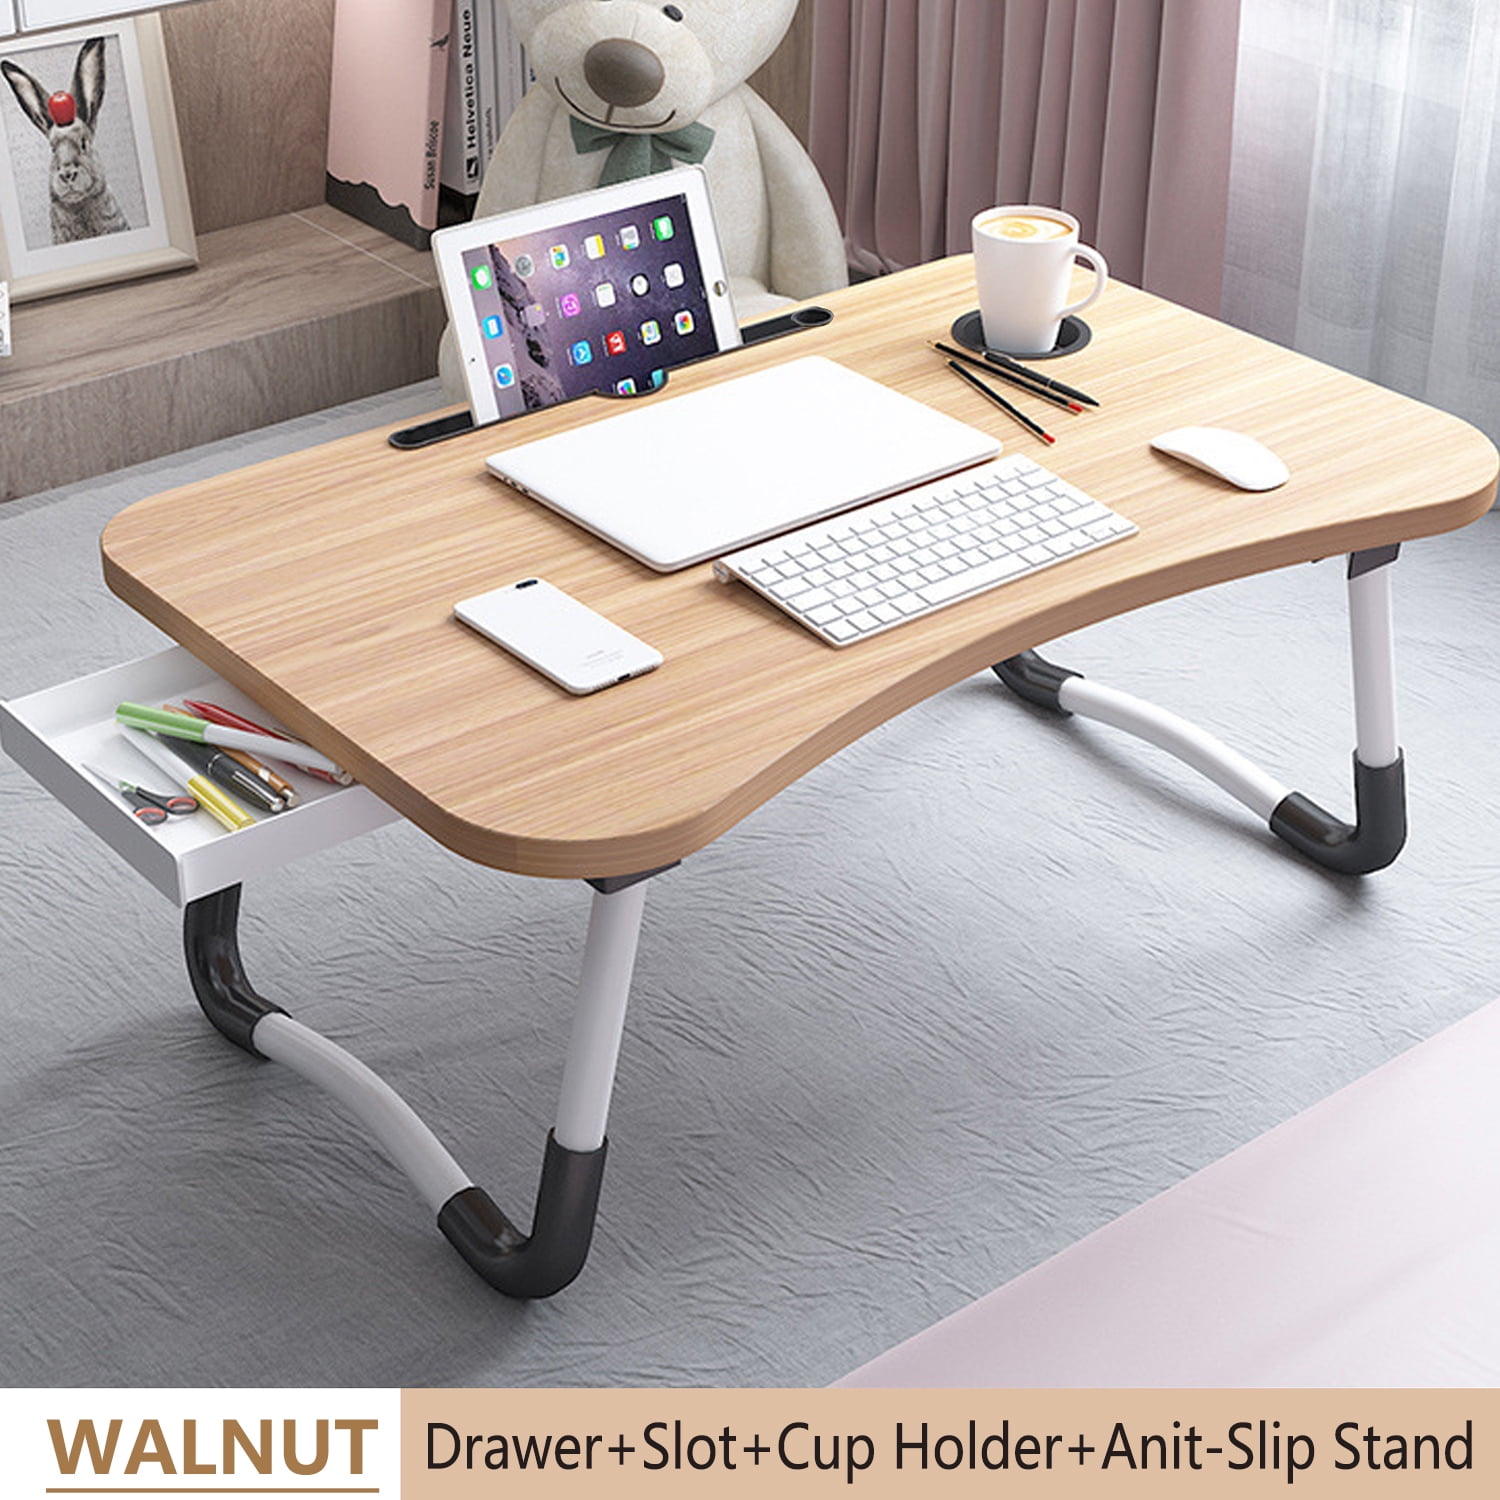 PHANCIR Foldable Lap Desk, 23.6 Inch Portable Wood Laptop Desk Table Workspace Organizer Bed Tray with iPad Slots, Cup Holder and Drawer, Anit-Slip for Working Reading Writing, Eating, Watching-Walnut